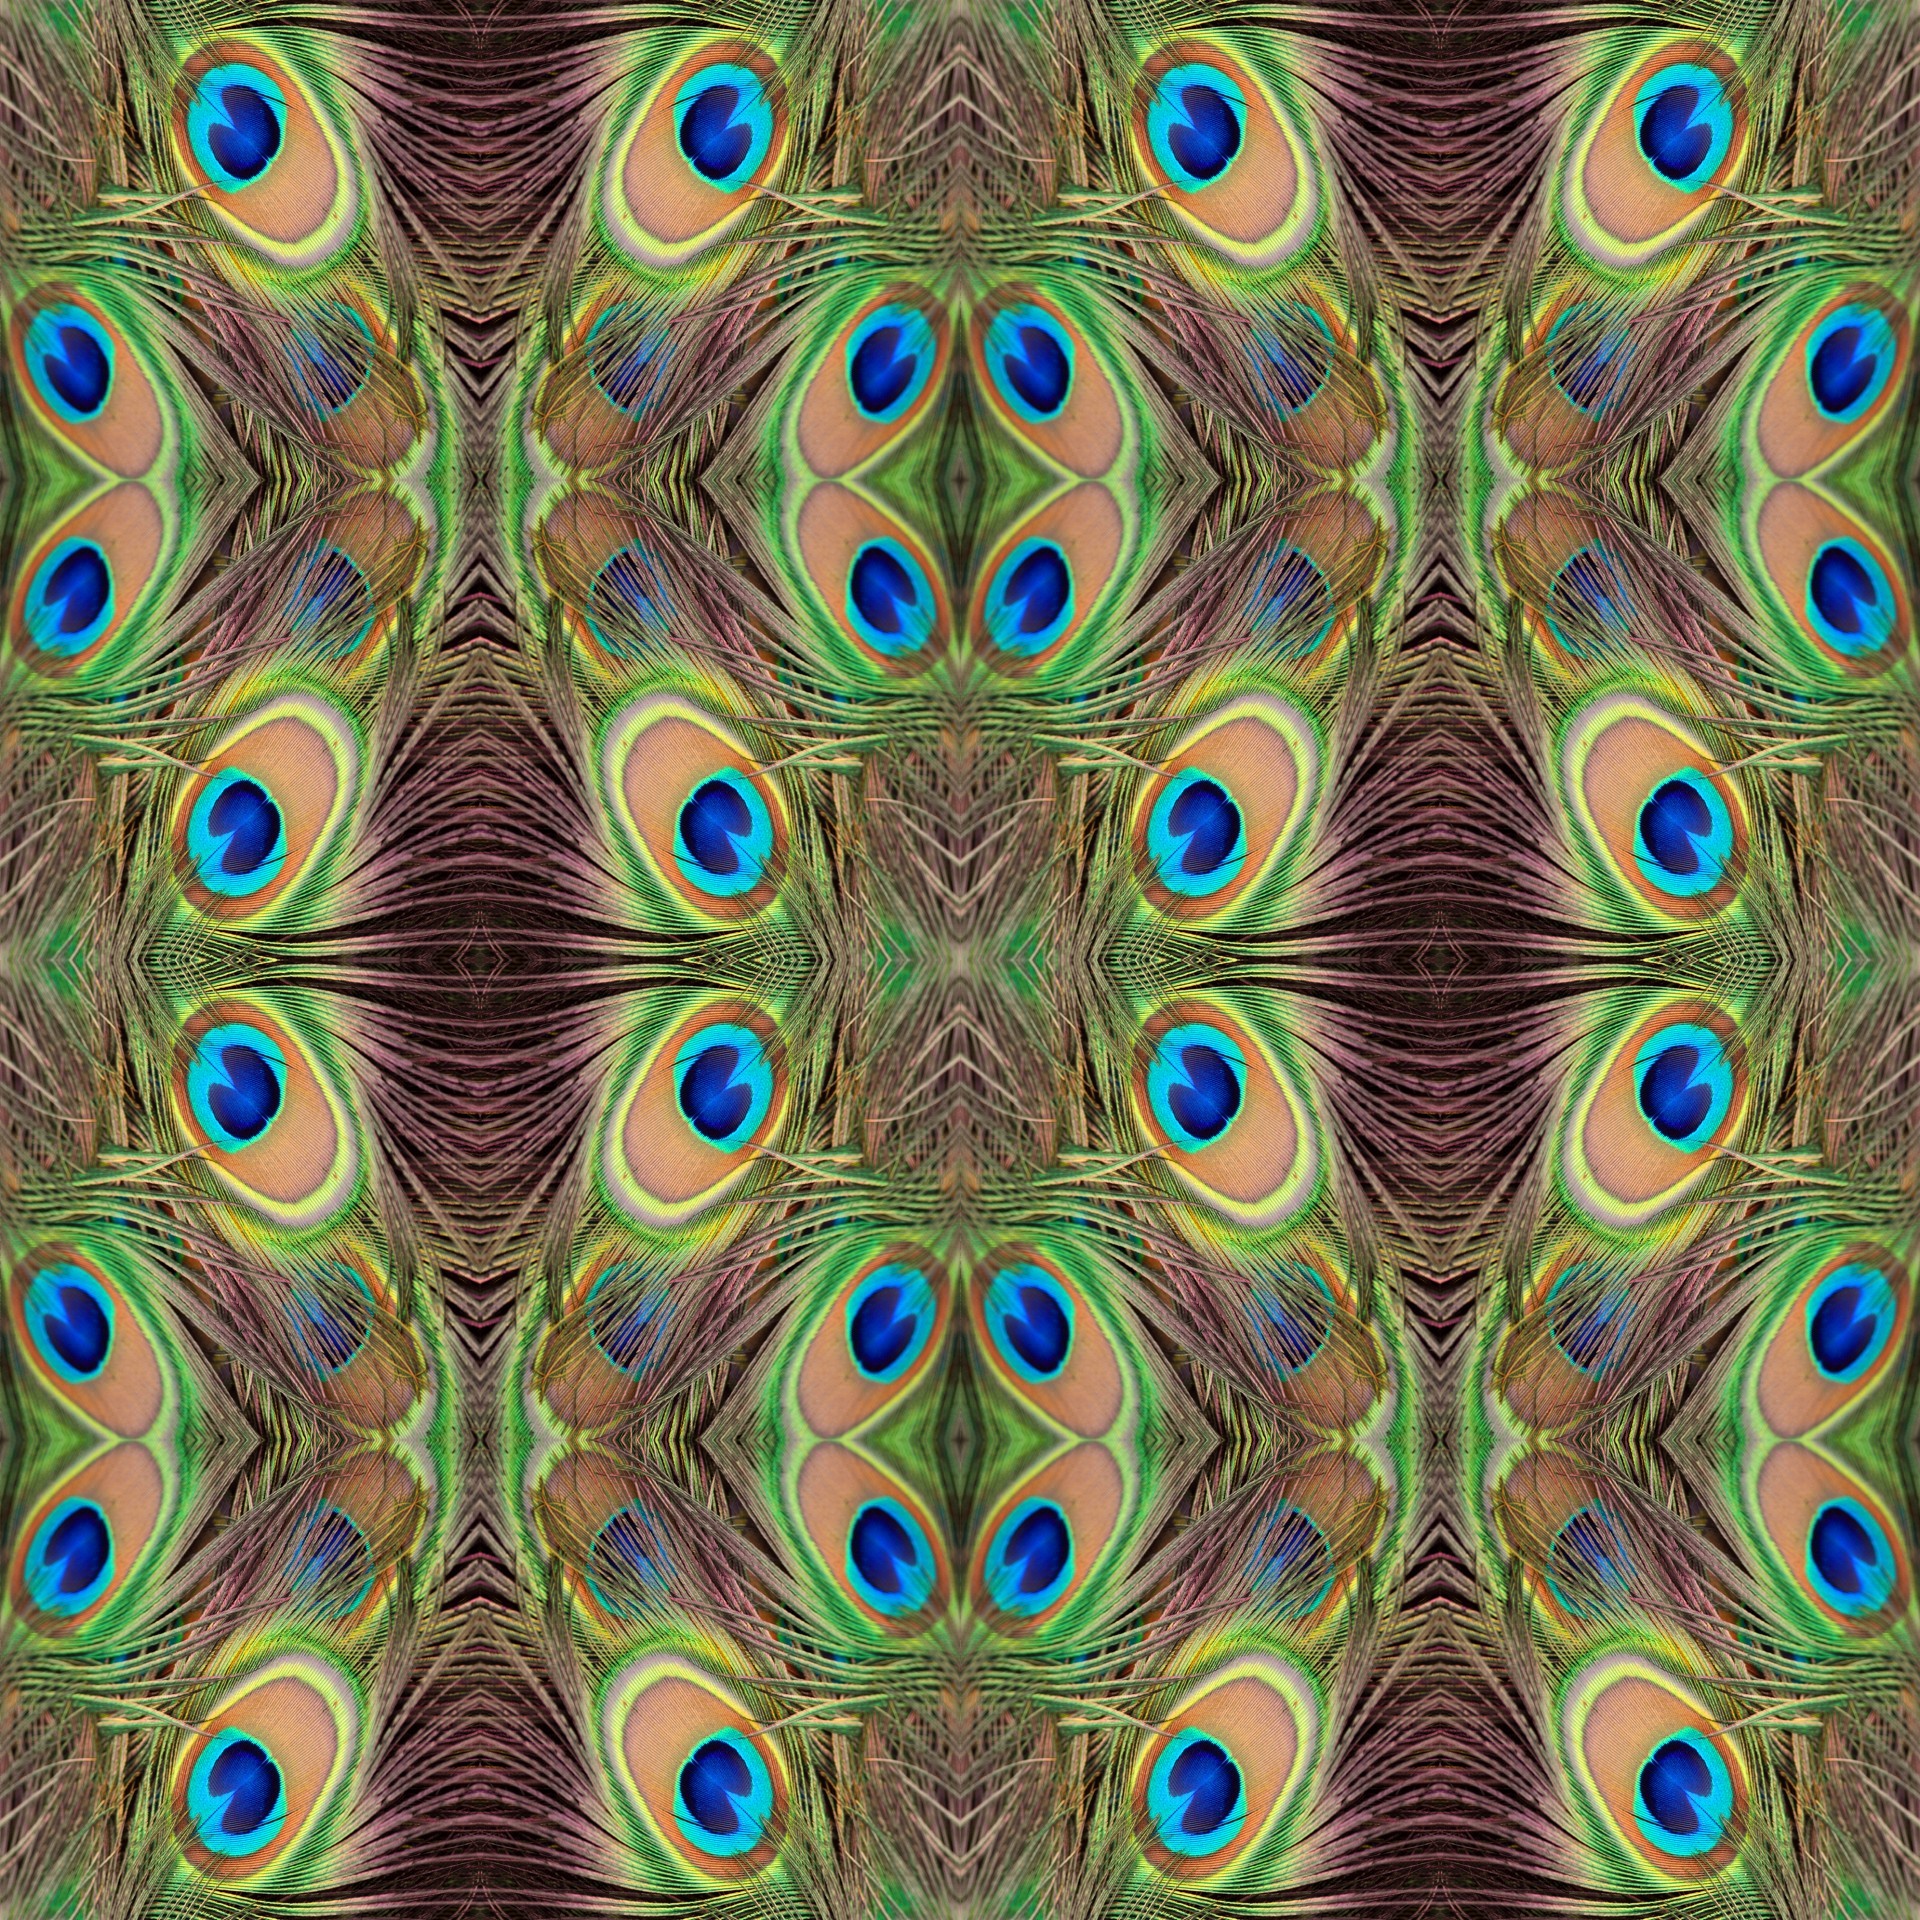 1920x1920 peacock,feathers,peacock feathers,abstract,pattern,seamless,wallpaper,